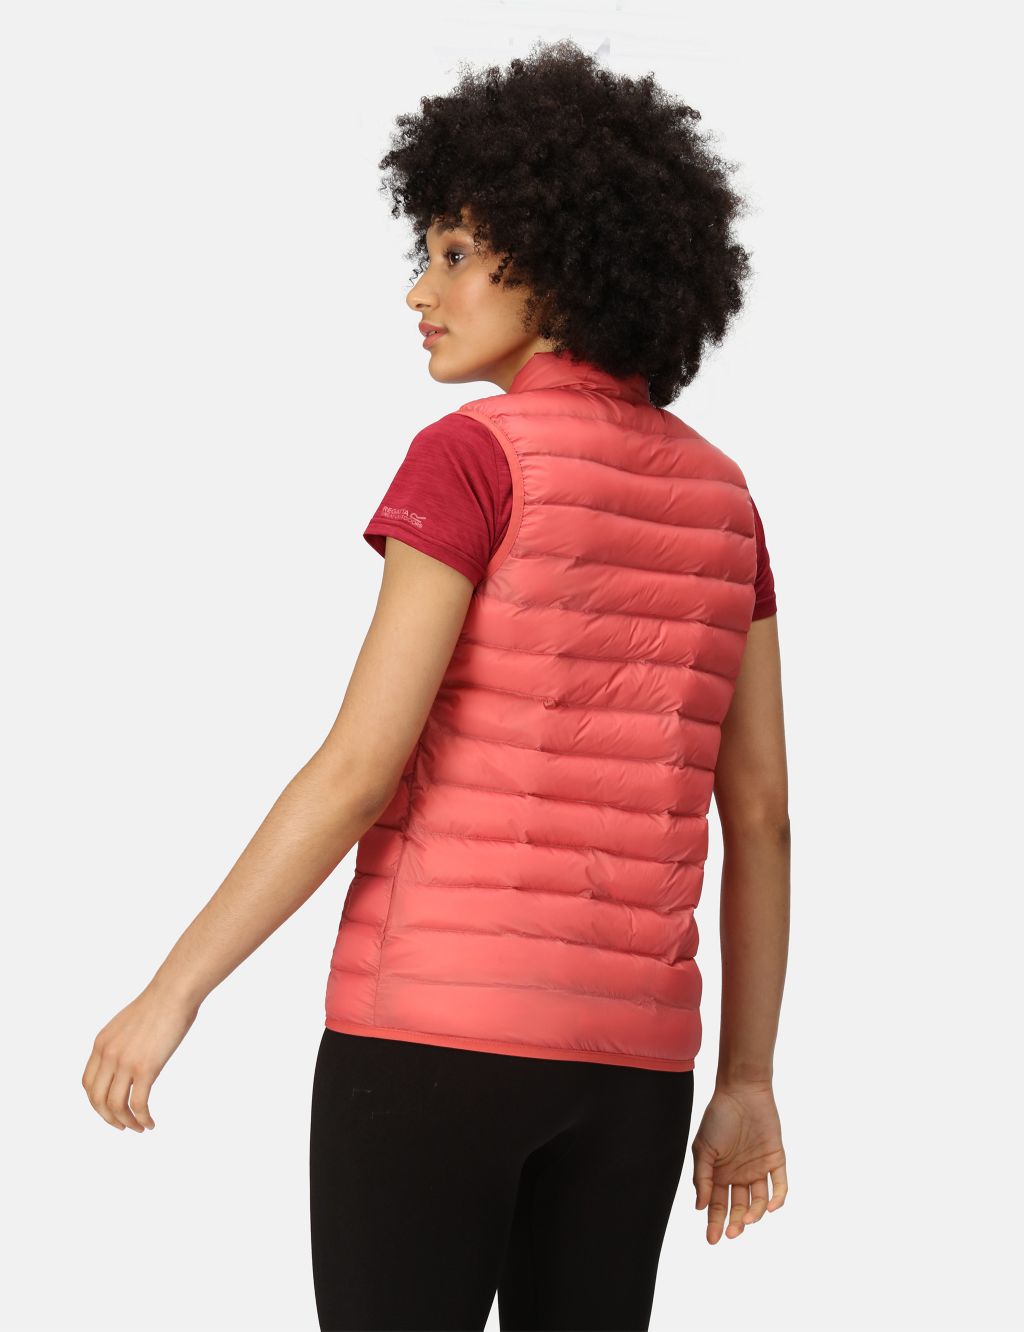 Marizion Water-Repellent Gilet image 3